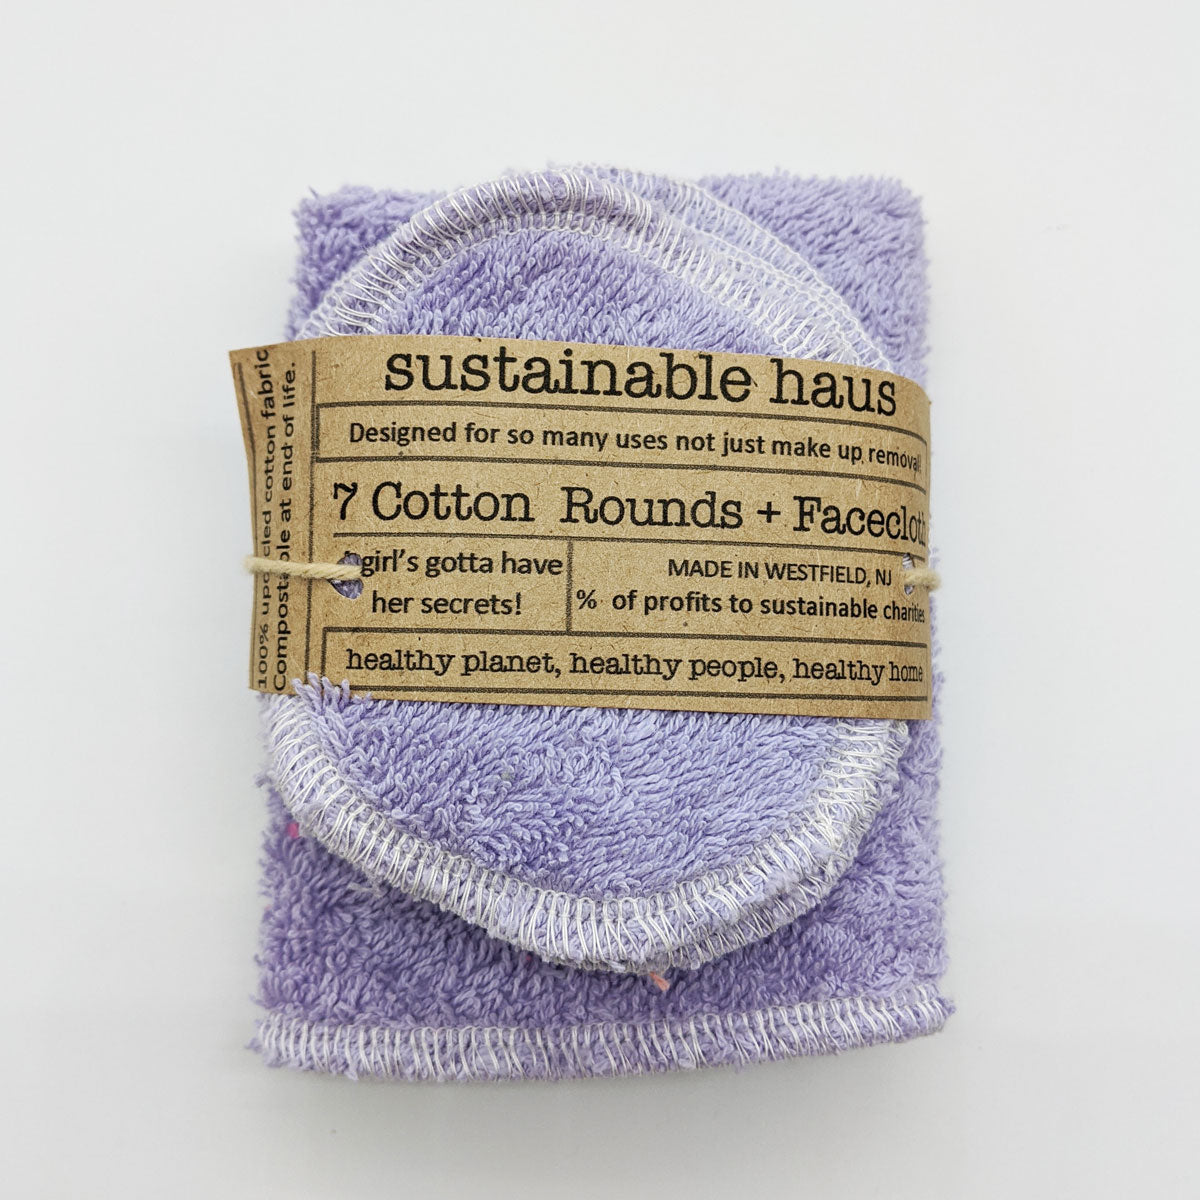 Reusable Cotton Rounds (7) with Washcloth by sustainable haus mercantile - lavender